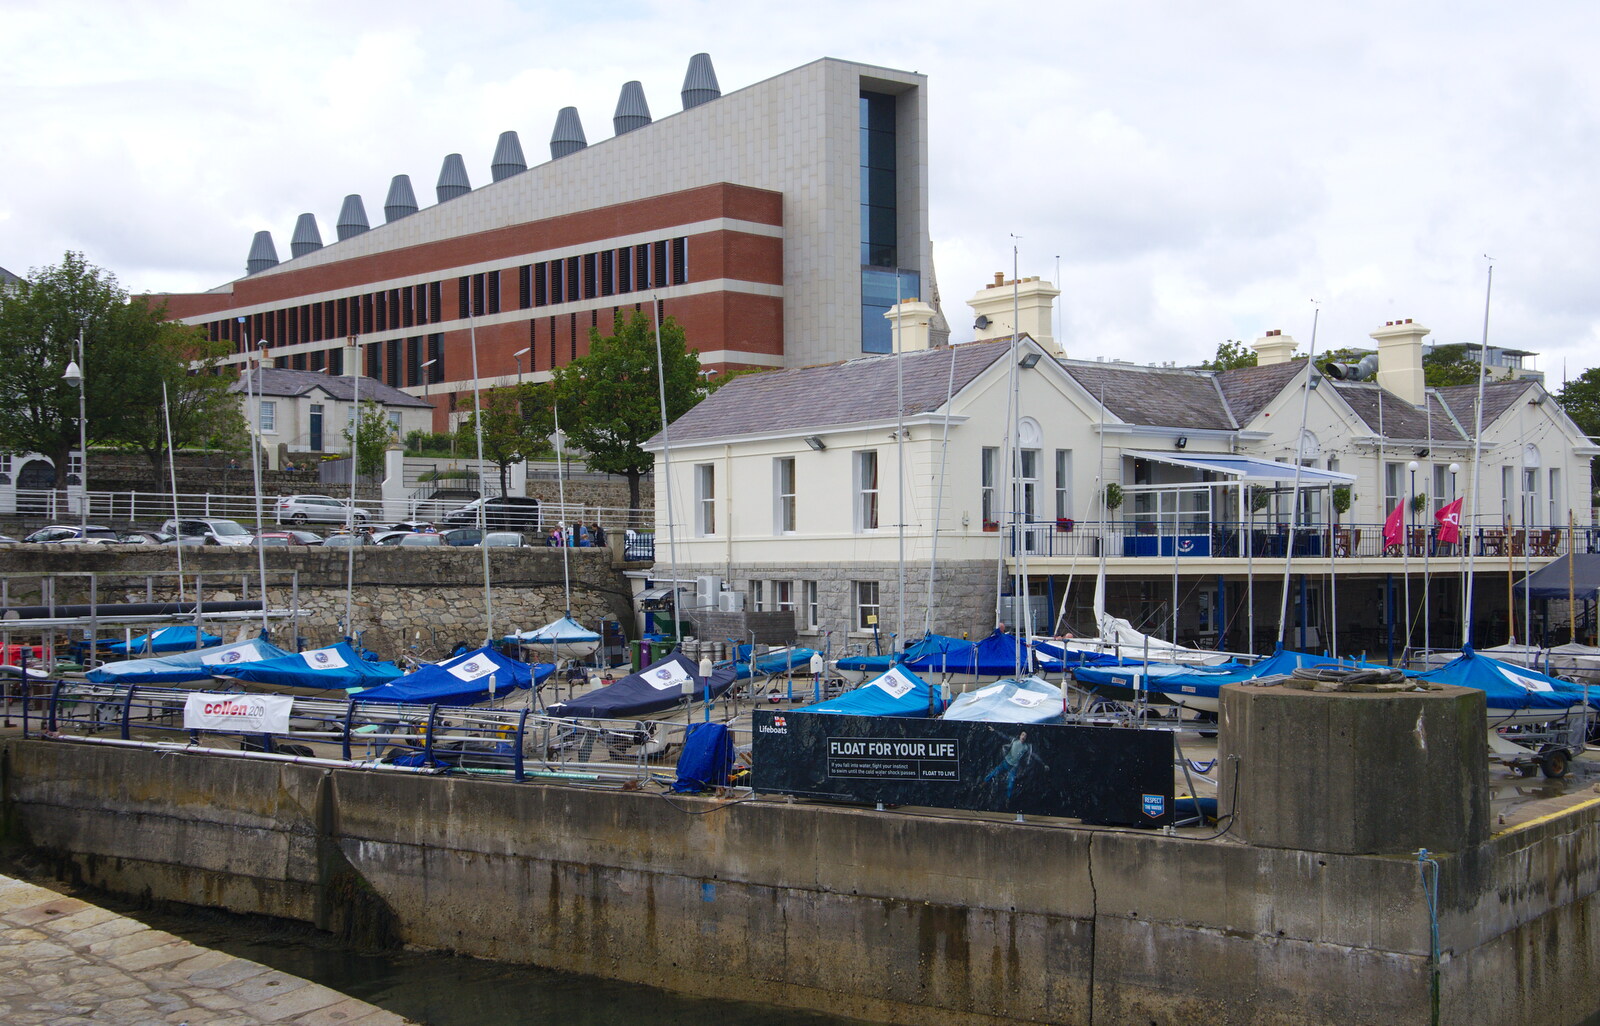 The Dun Laoghaire library from Jimmy and Catherina's, Ballsbridge, Dublin - 10th August 2019